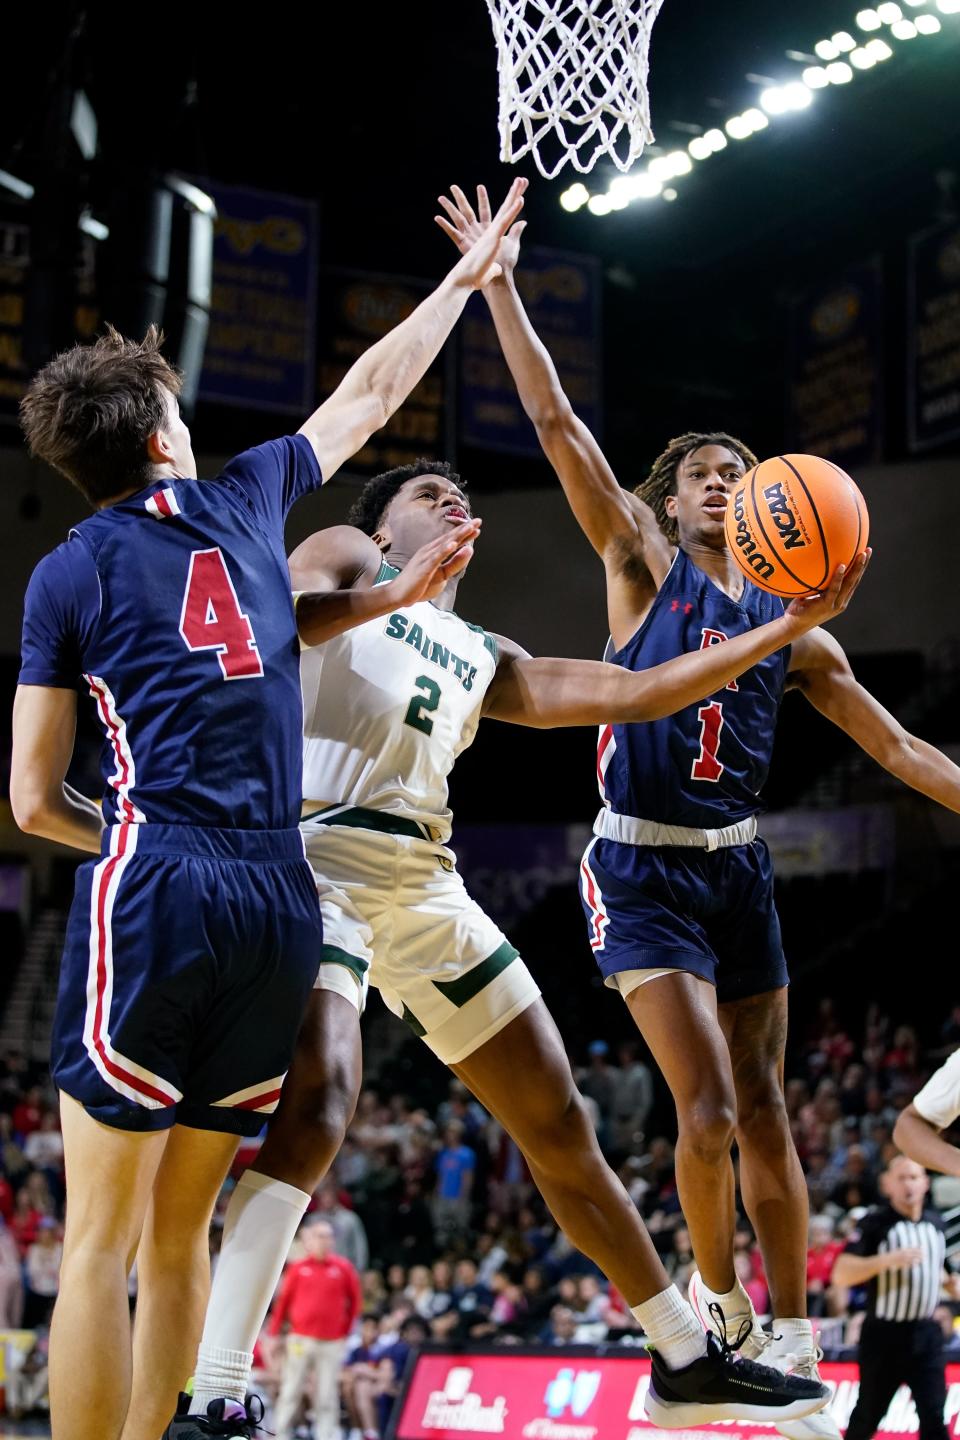 Briarcrest's Jaye Nash (2) shoots between Brentwood Academy's George Macintyre (4) and Drey Moss (1) during the third quarter of the DII-AA championship game at the Hooper Eblen Center in Cookeville, Tenn., Saturday, March 4, 2023.